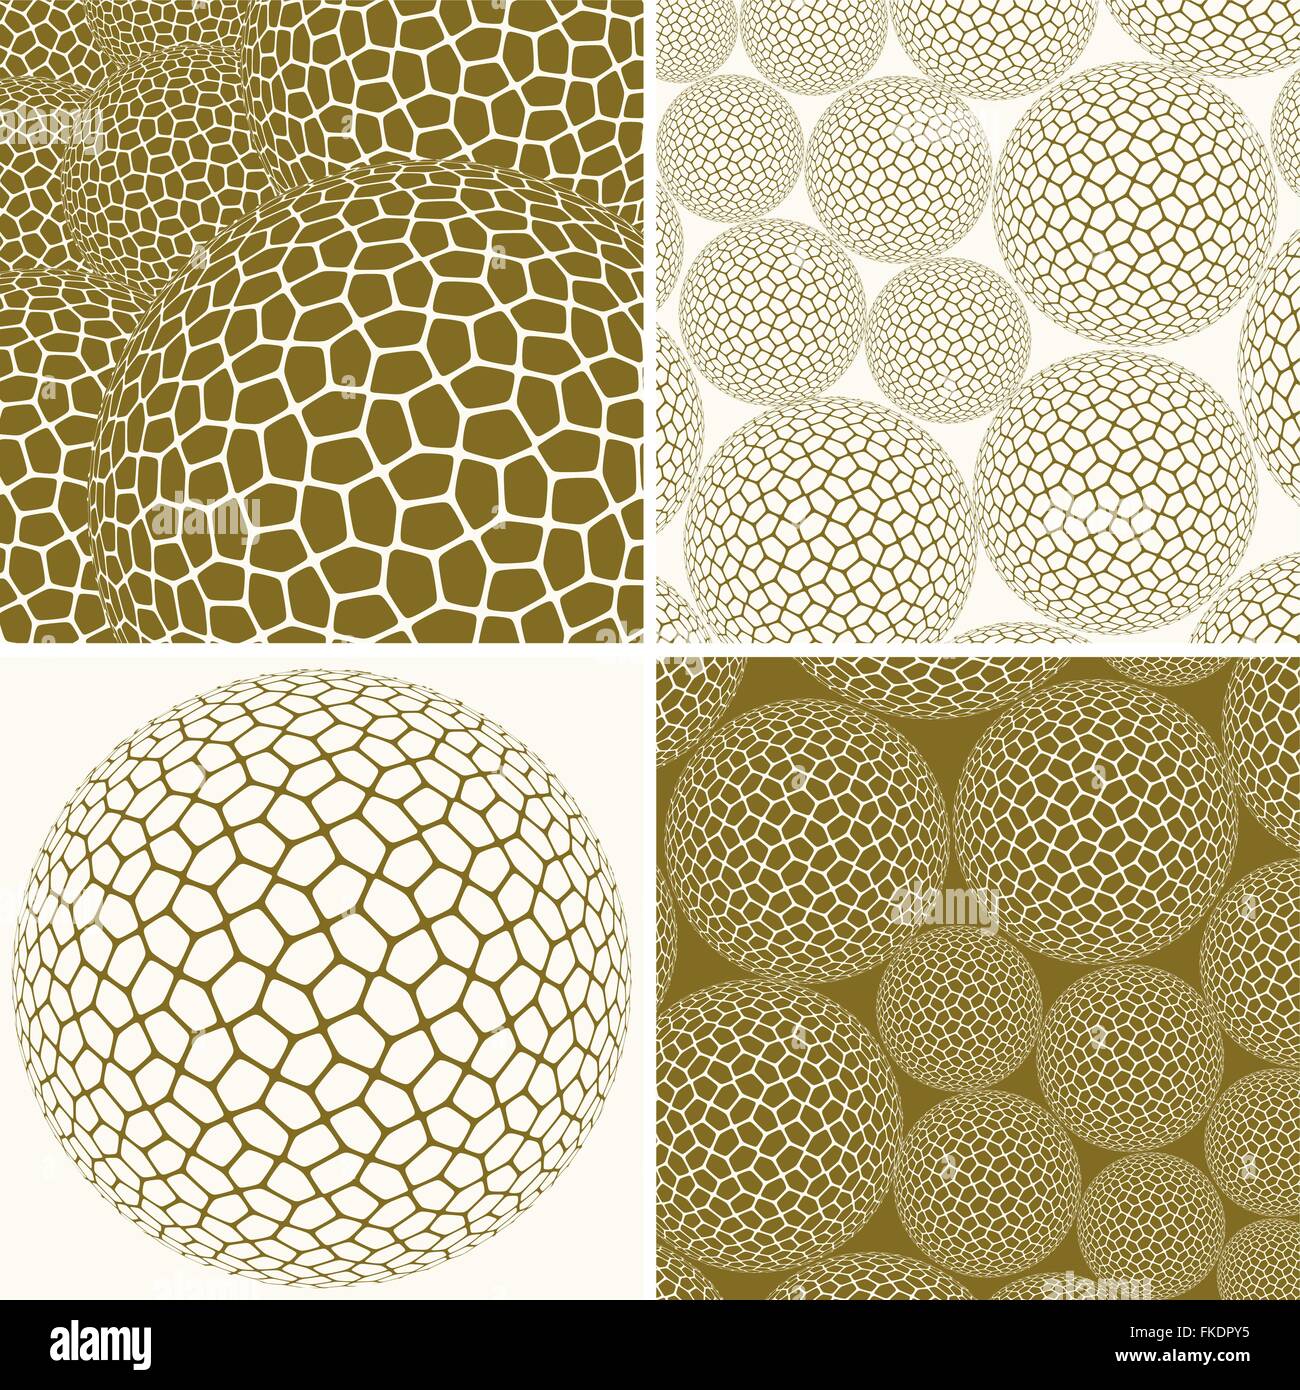 A set of 4 graphic compositions, based on a spherical shell with a polygons pattern on its surface. Stock Vector